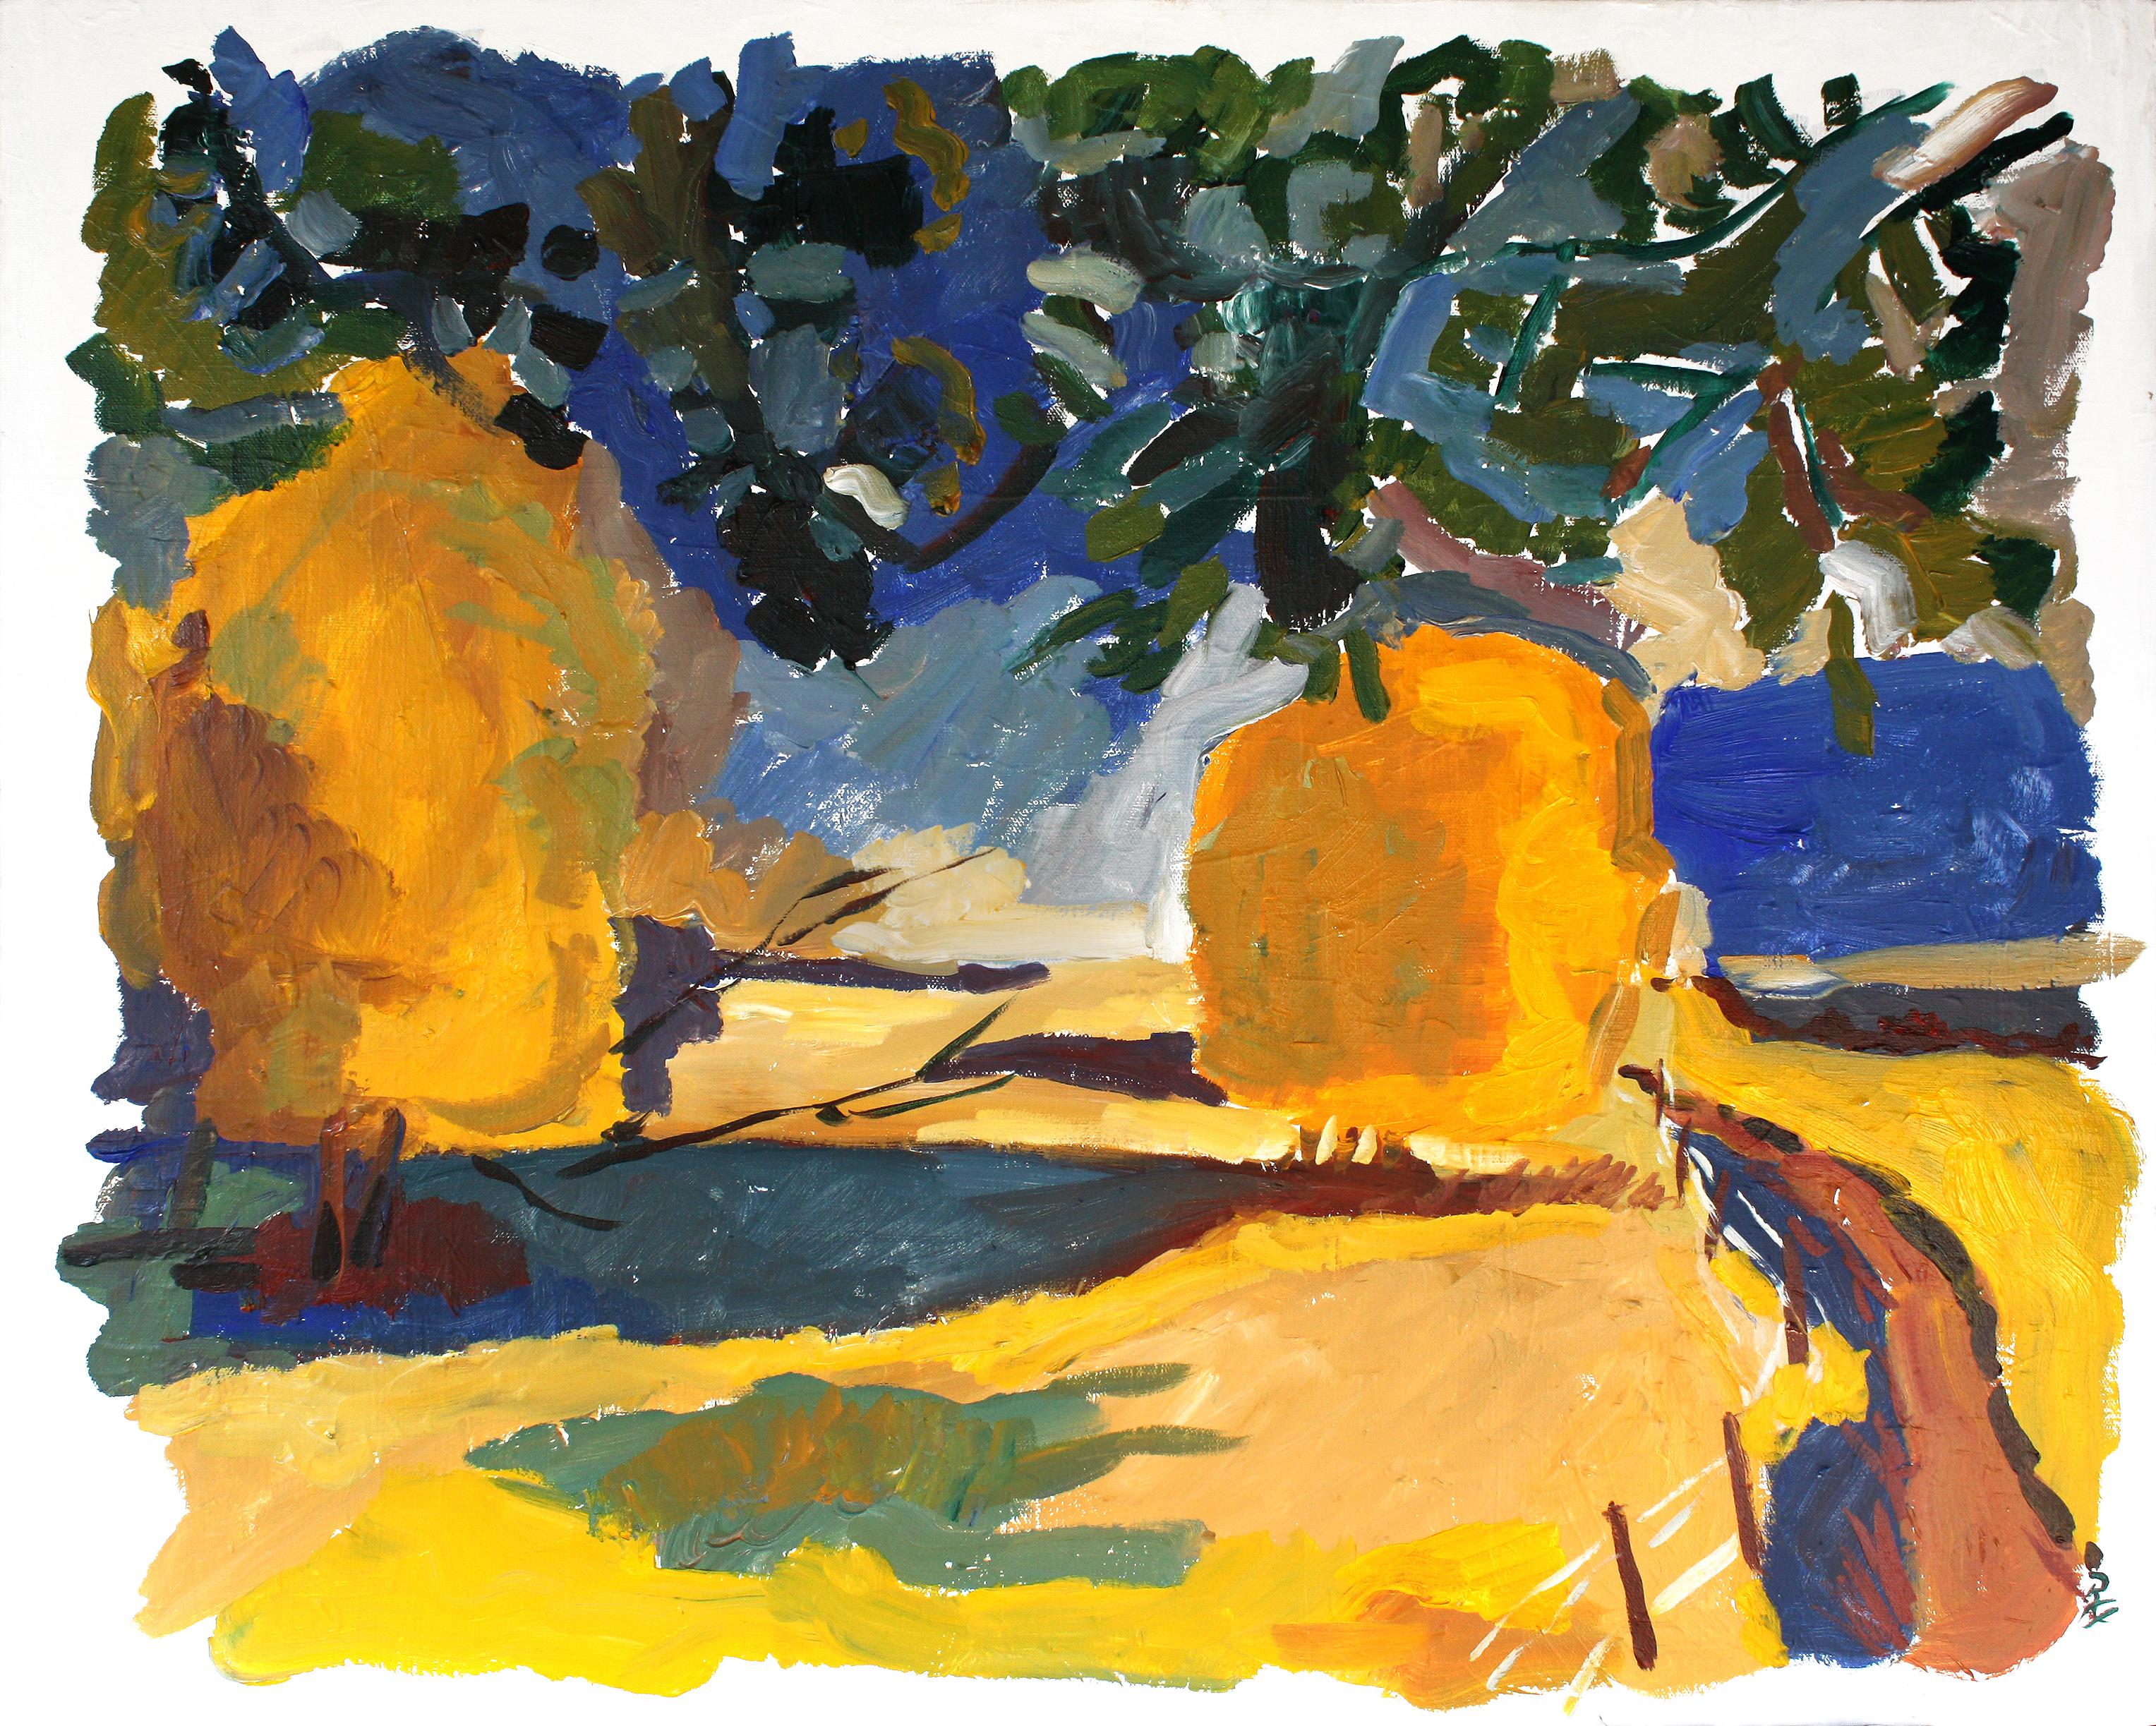 Robert Hofherr Landscape Painting - Study in Blue and Gold, Original Painting